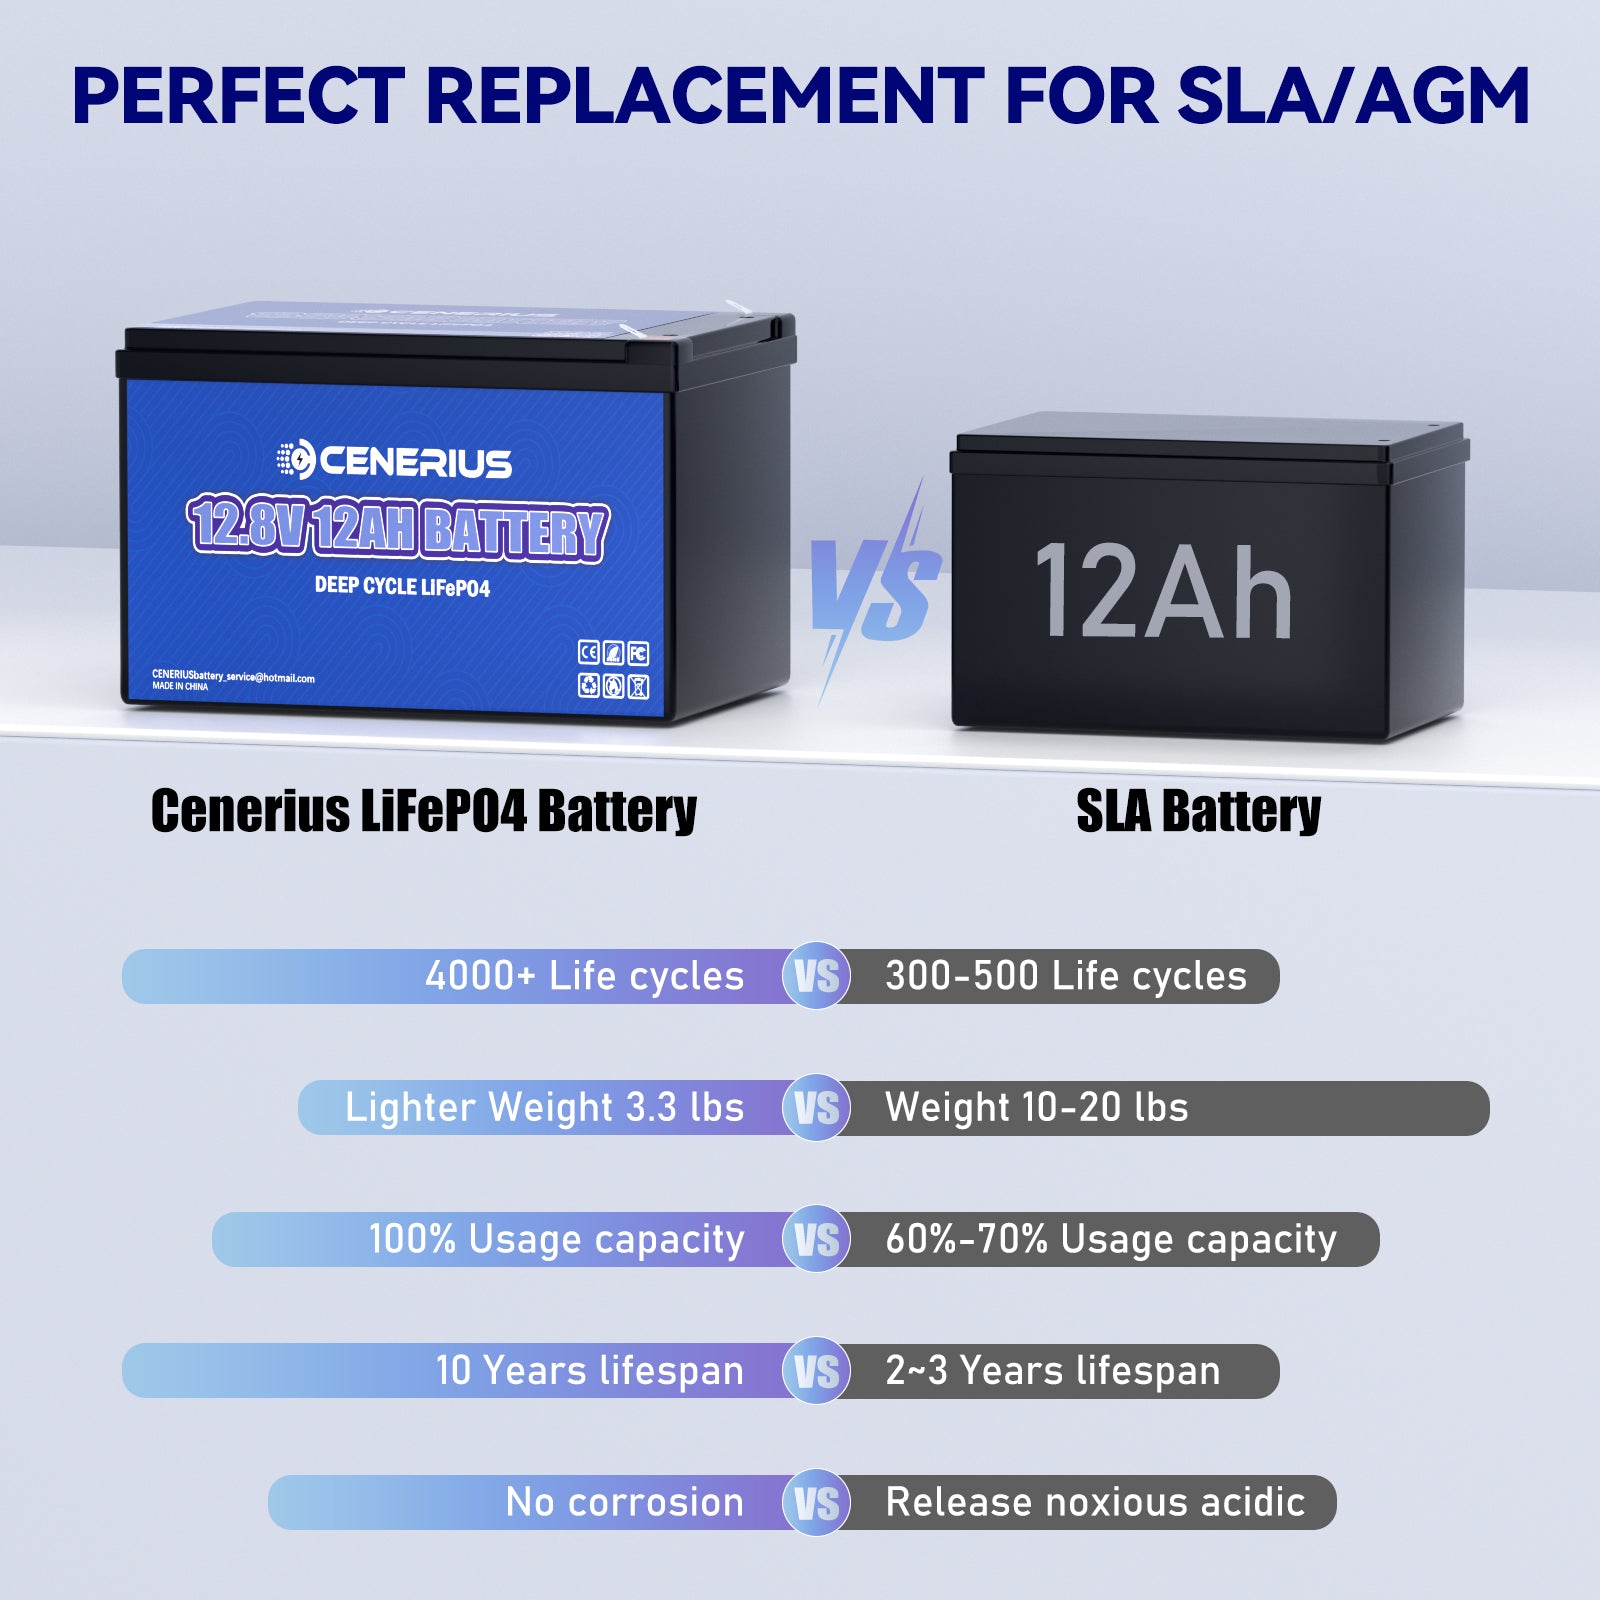 Cenerius 12V 12Ah LiFePO4 lithium battery is the perfect replacement for lead-acid batteries